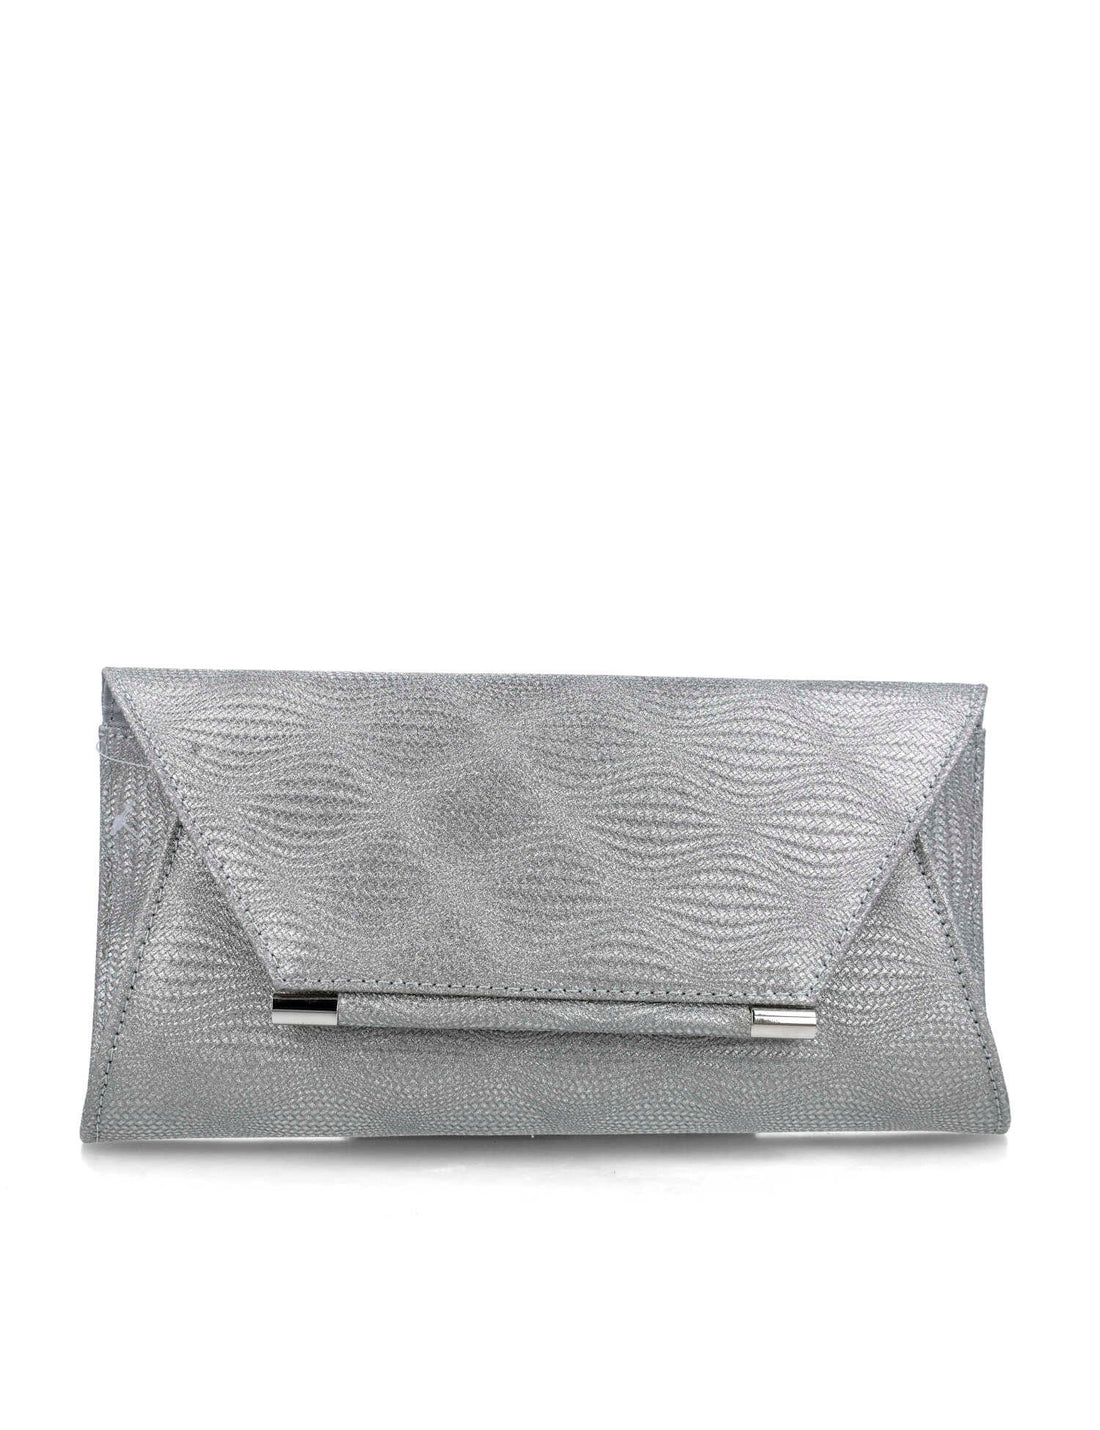 Grey Clutch With Silver Hardware_85642_09_01